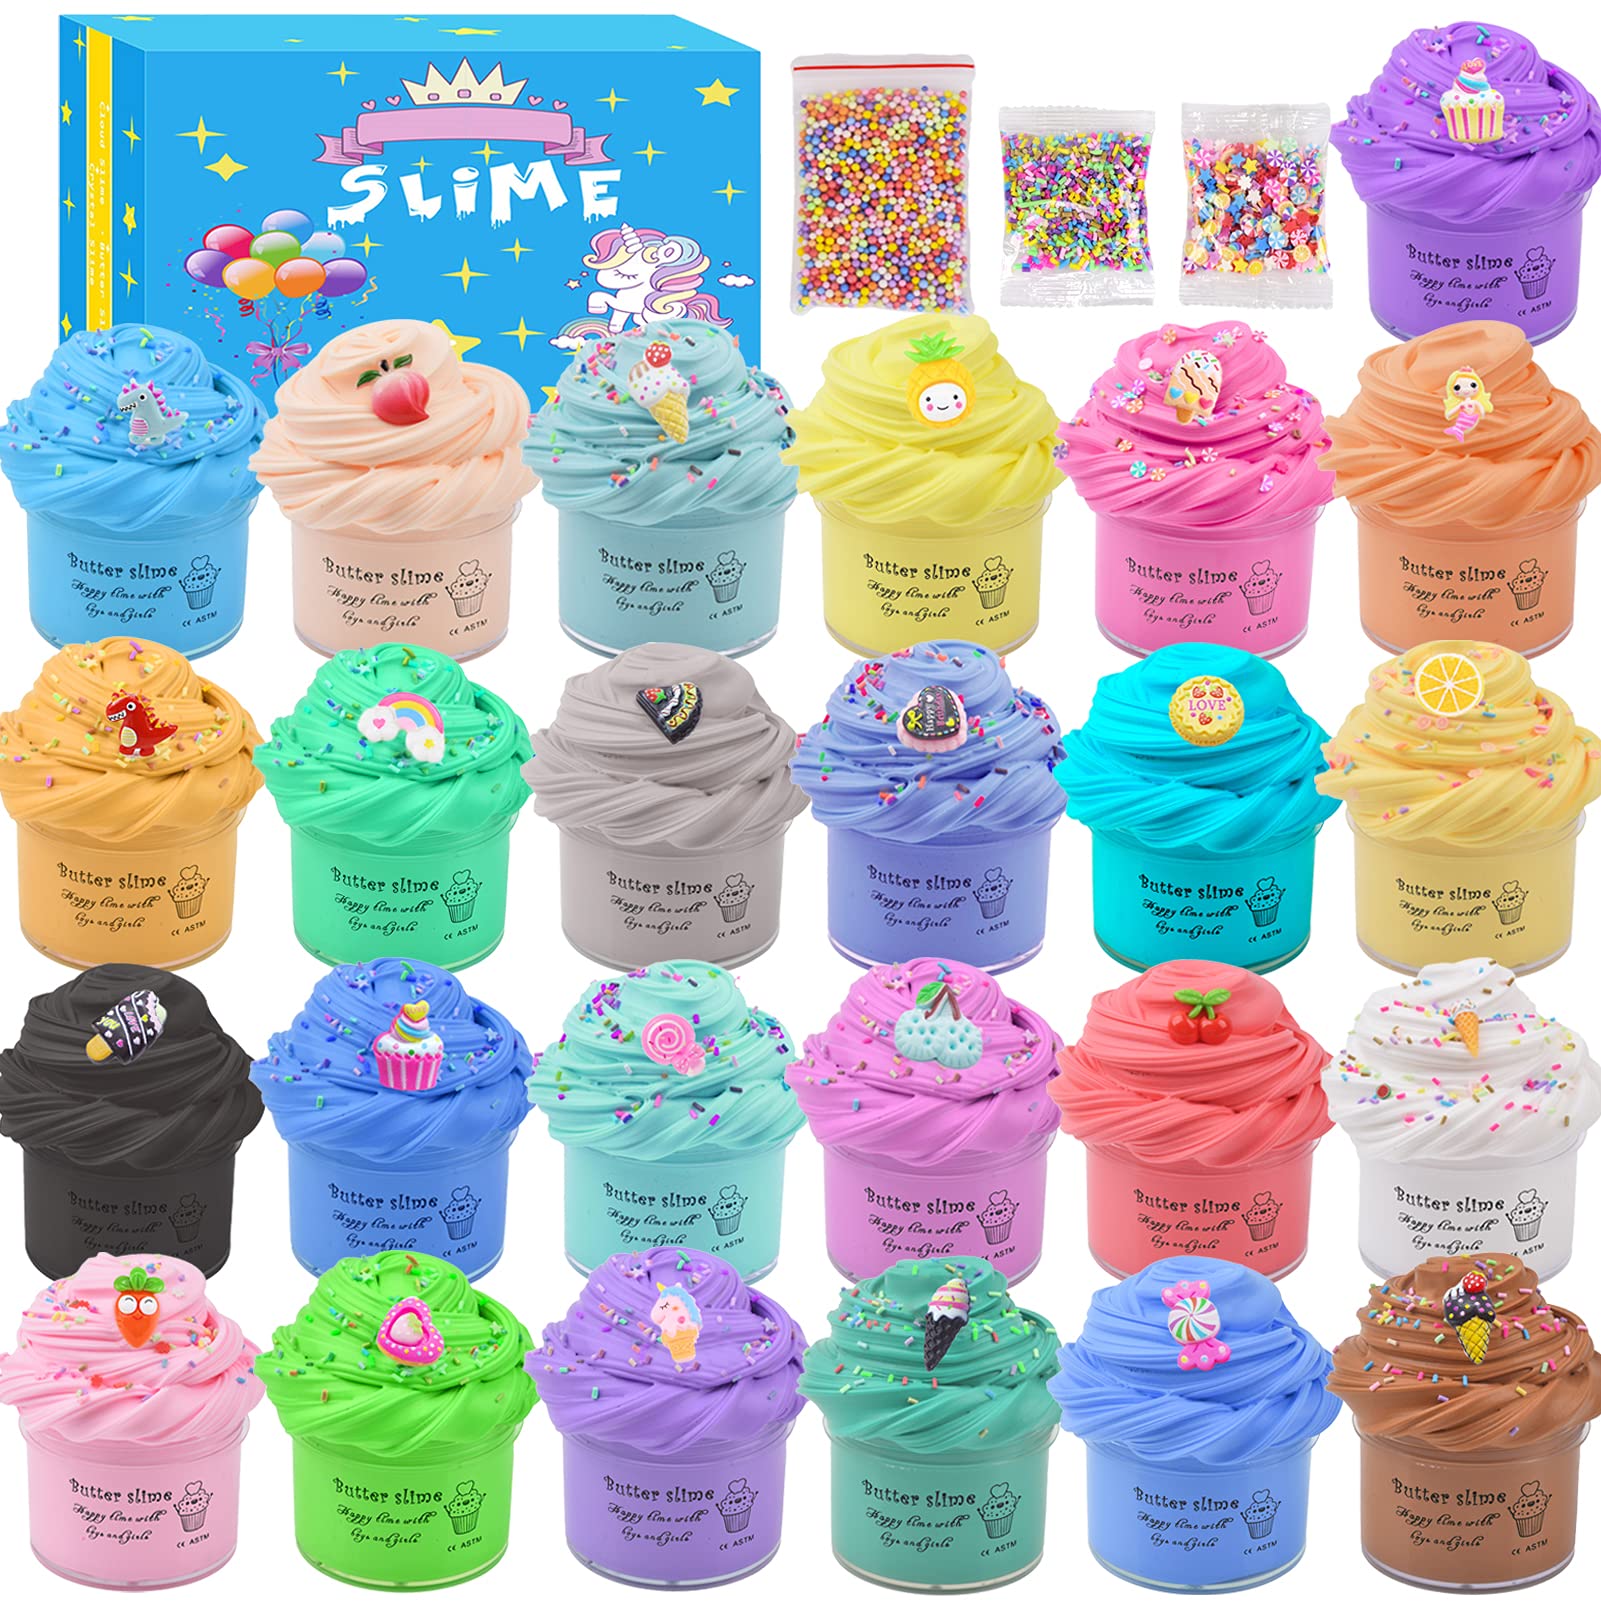 SUNNYPIG 6-7-8-9-10 Year Old Girl Gifts-Toys for 5-6-7-8 Year Old